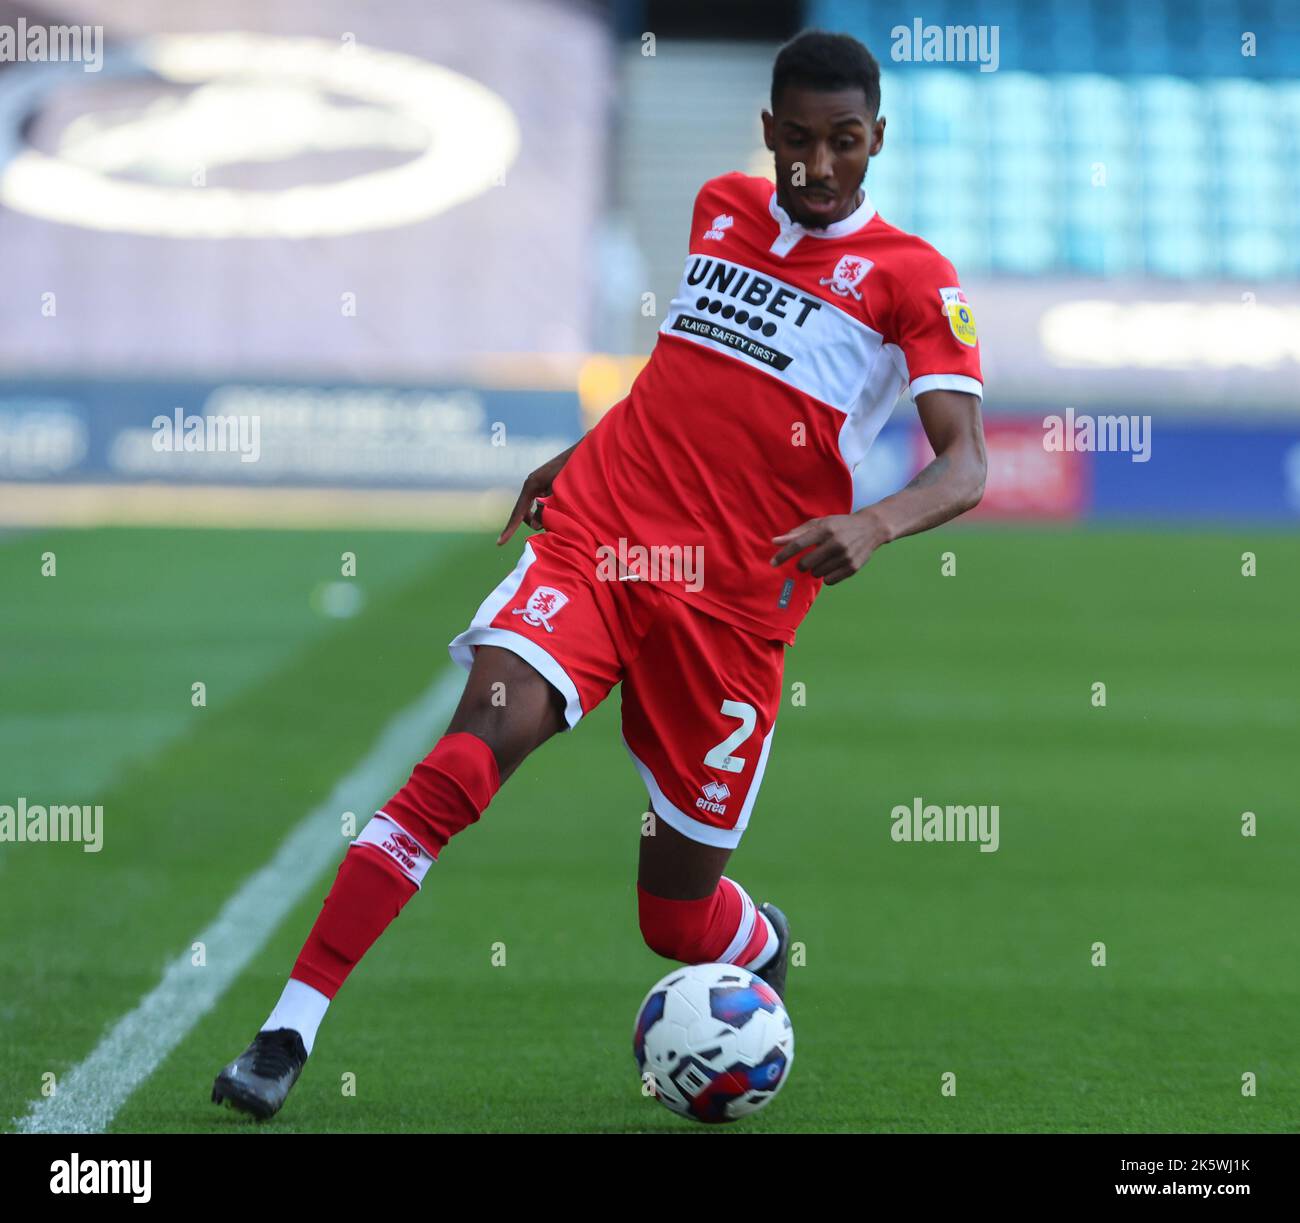 LONDON ENGLAND - OCTOBER  08 : Isaiah Jones of Middlesbrough during Championship match between Millwall against Middlesborough at The Den, London on 0 Stock Photo